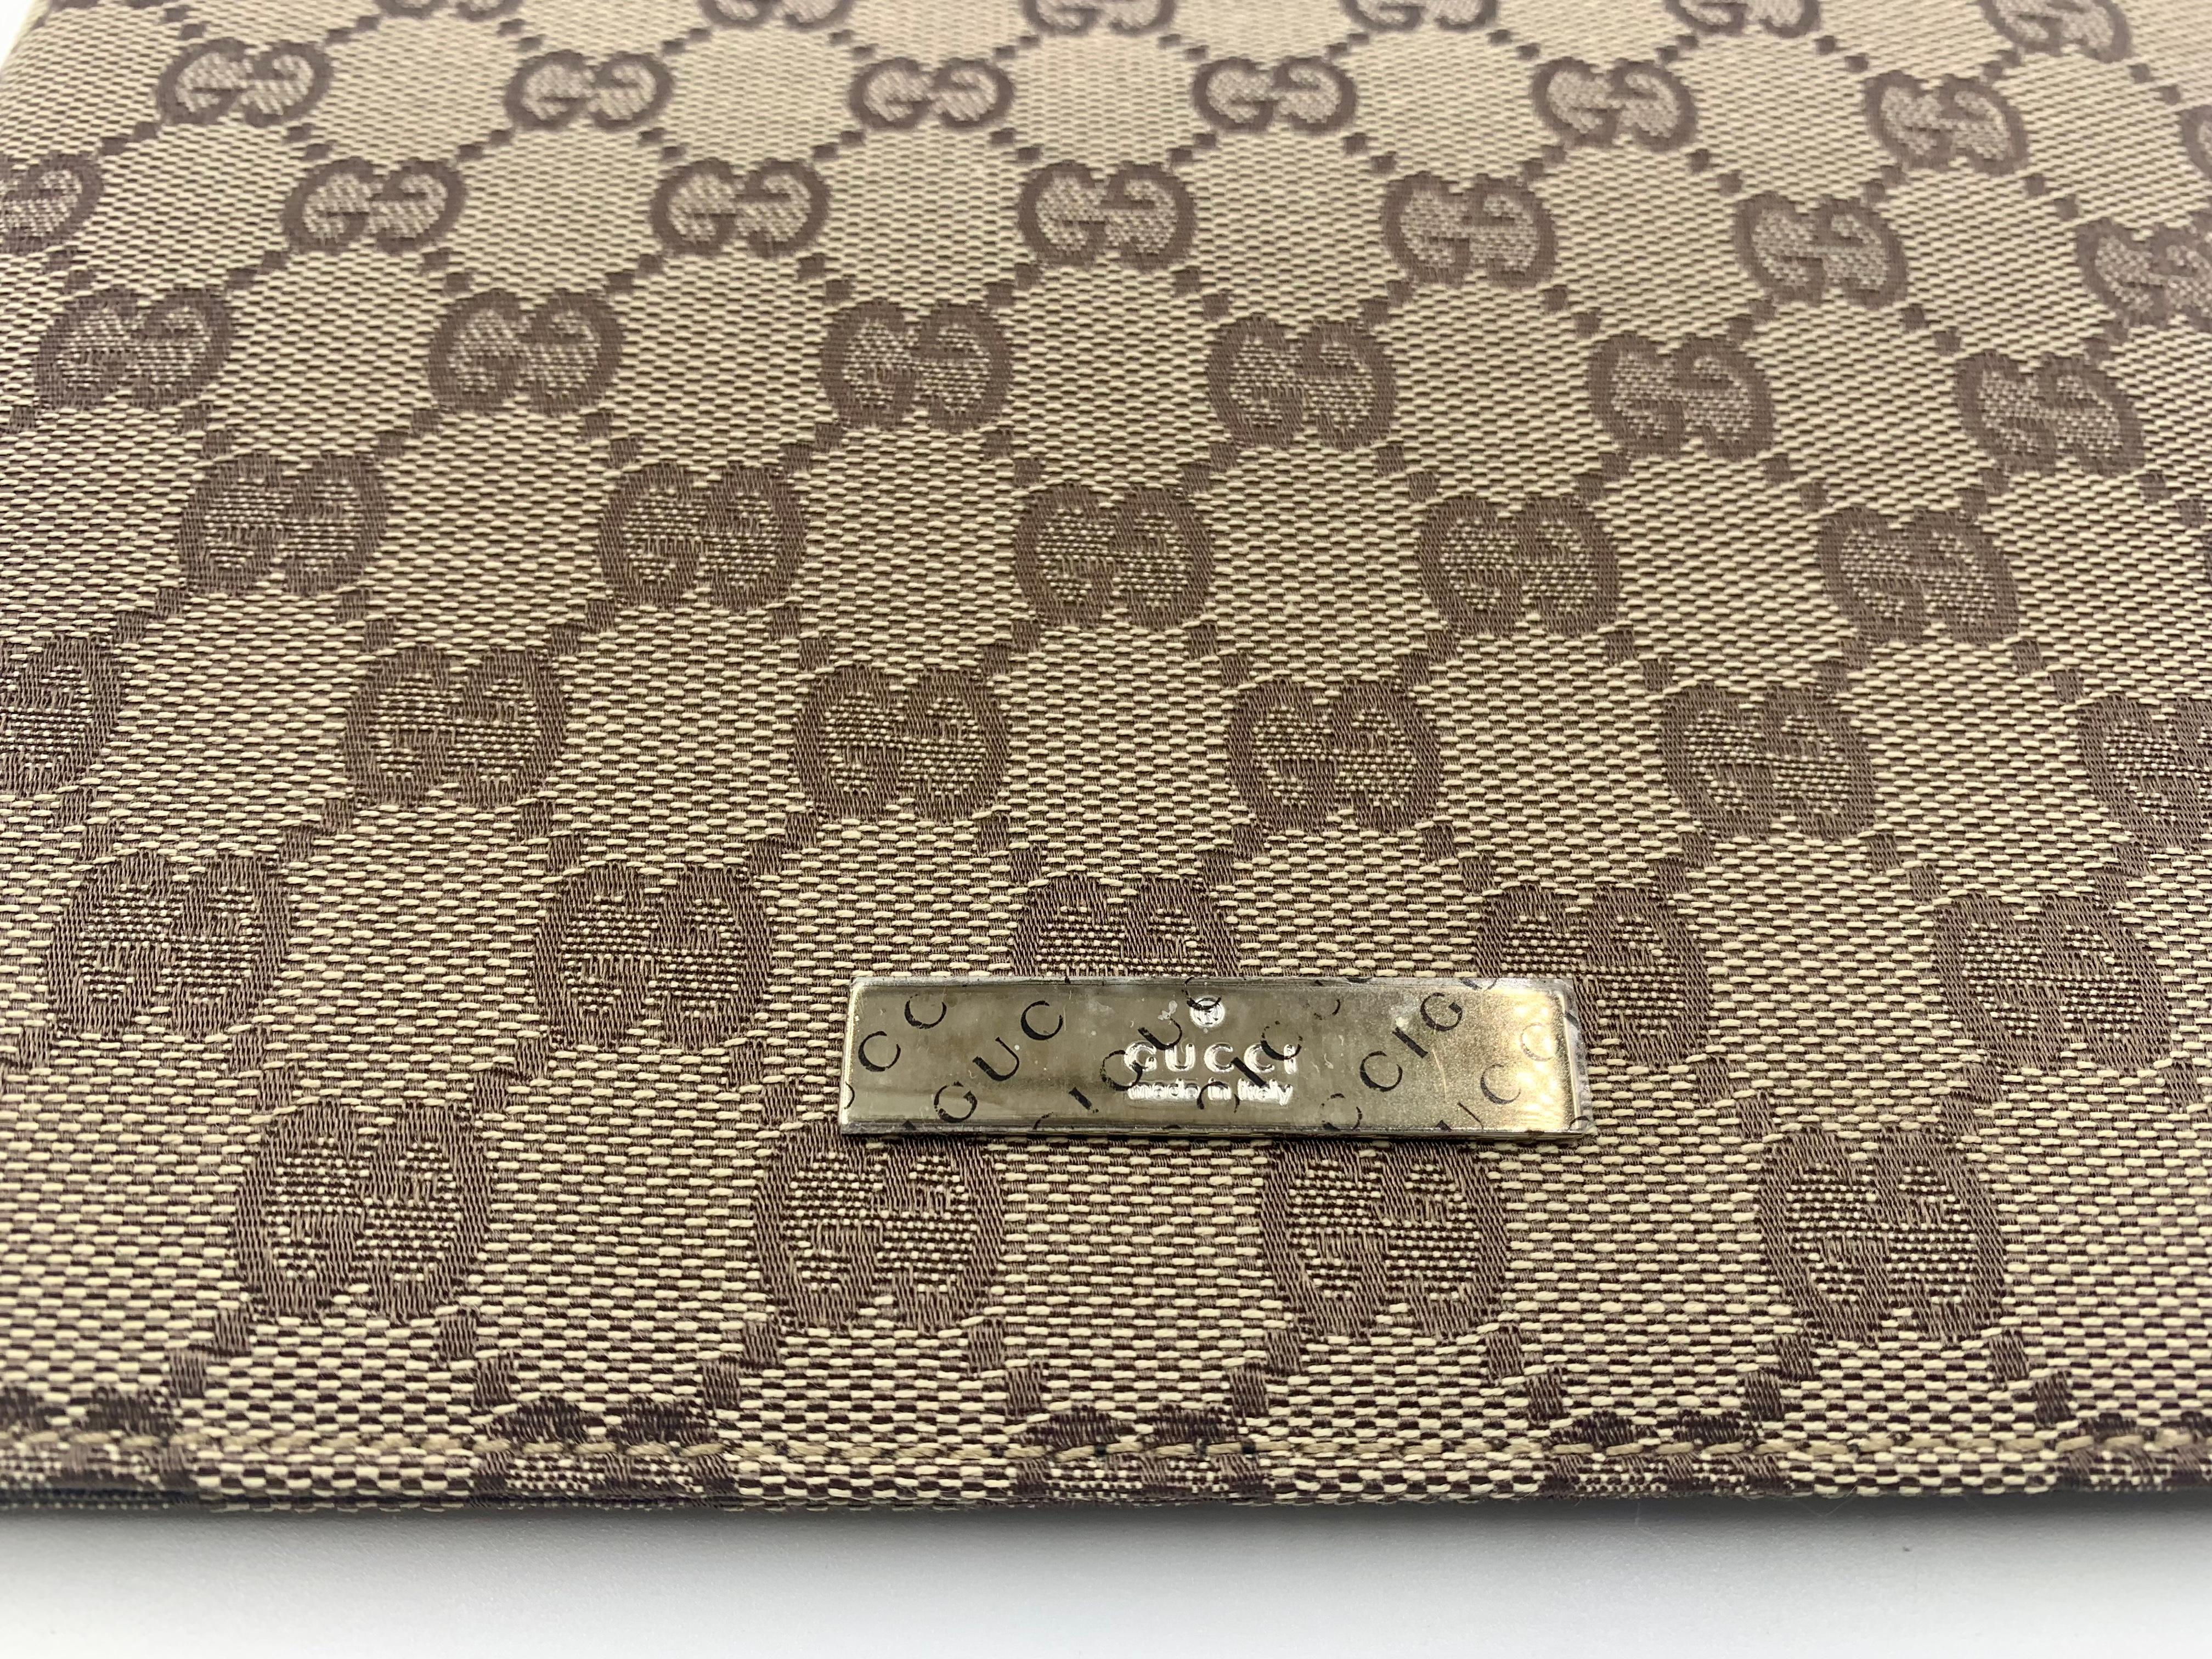 Vintage Gucci GG Supreme beige canvas and black leather bi-fold picture frame.
Late 20th century
Beige Ebony GG Supreme canvas
Black leather interior
Palladium toned hardware
Made in Italy
Condition: Very good, light surface wear commensurate